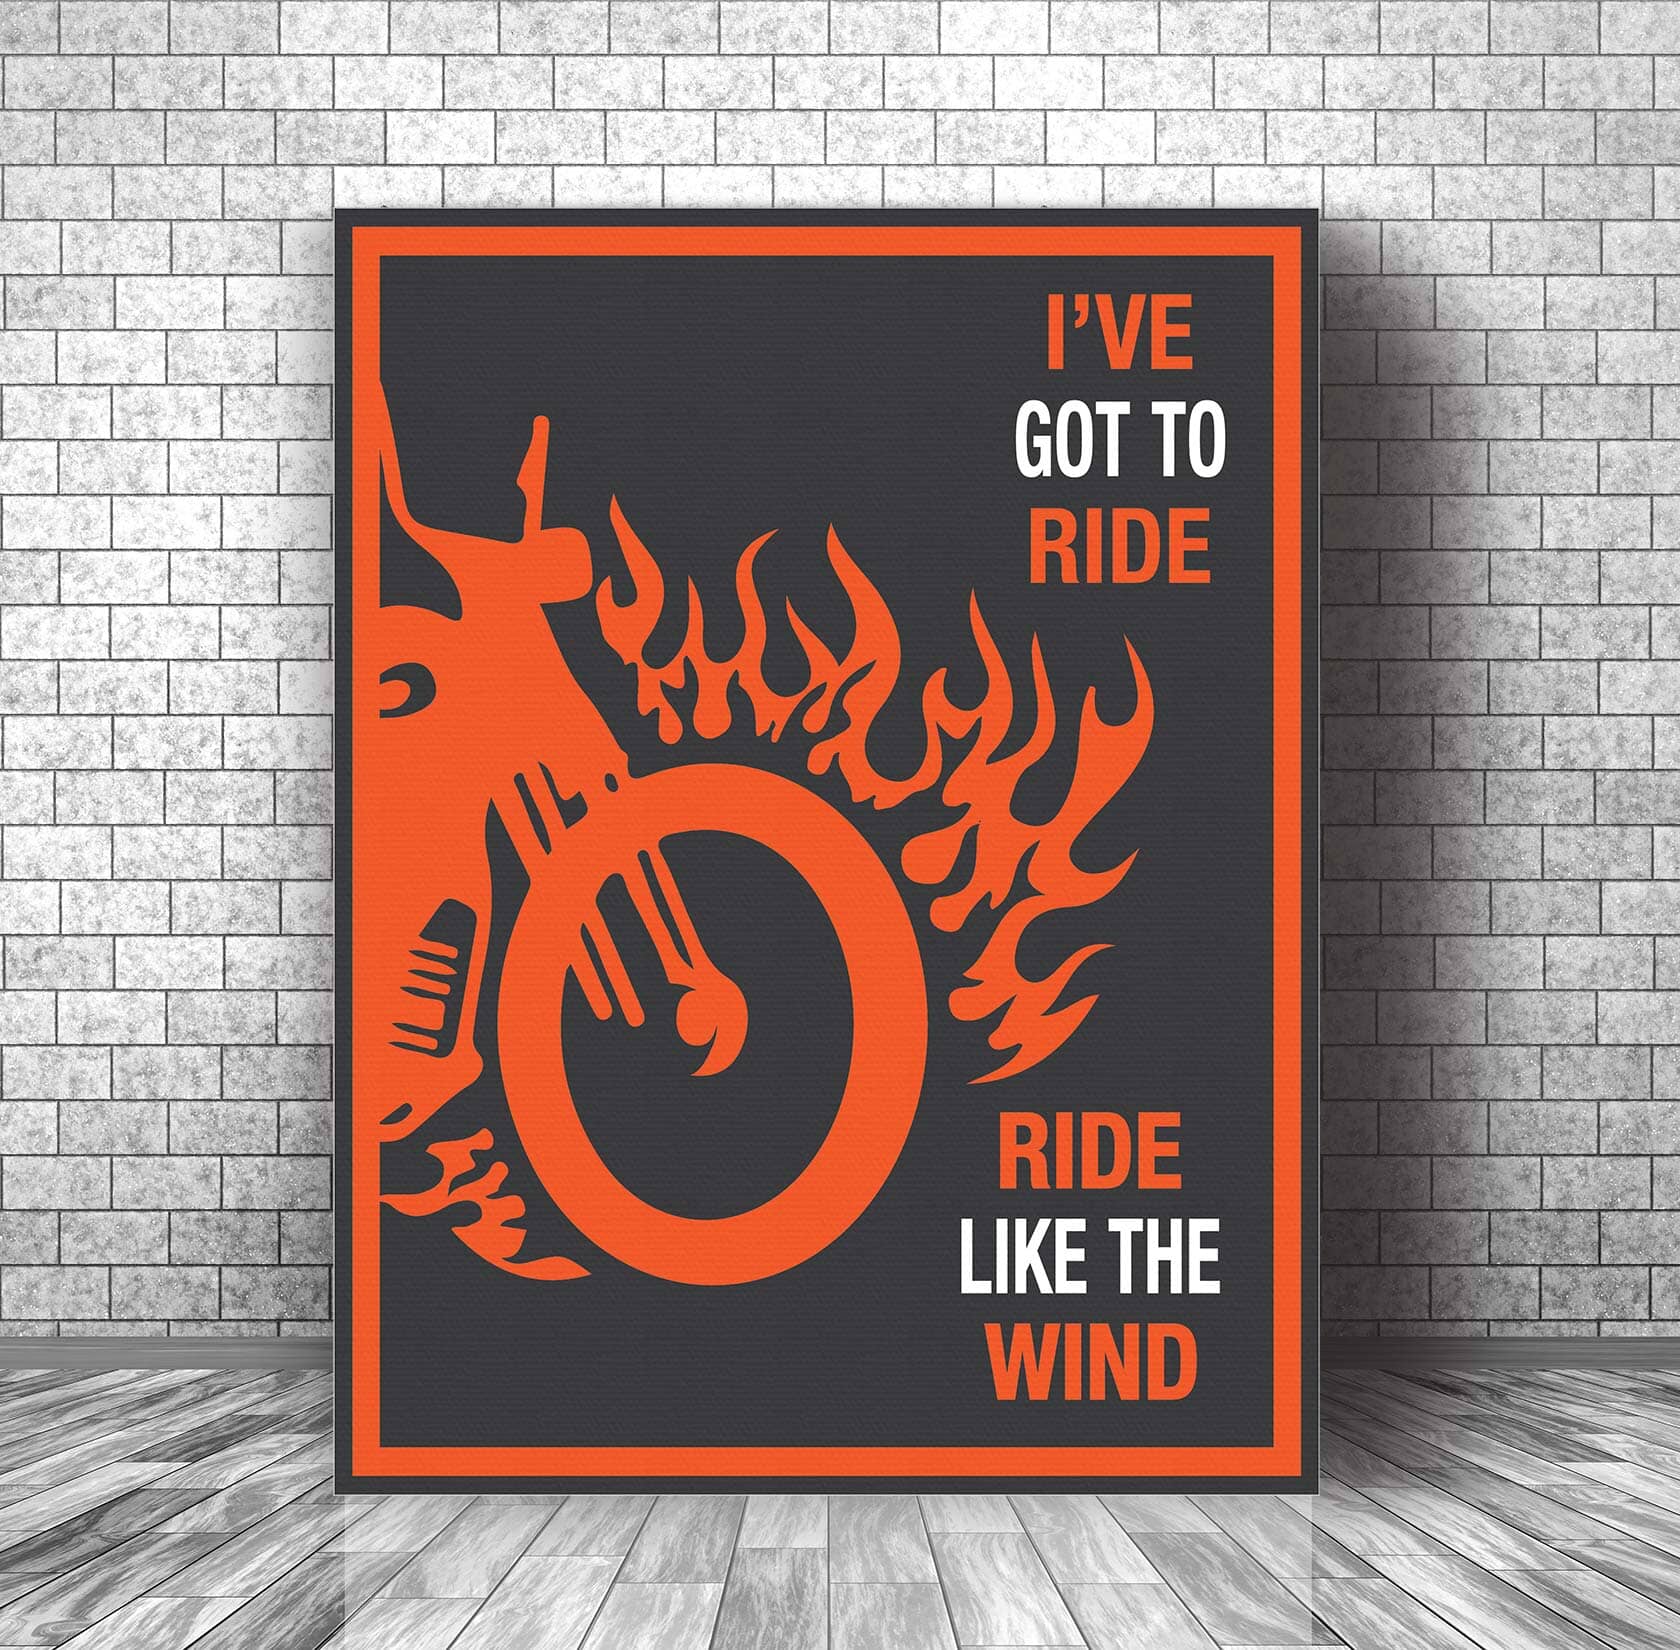 Ride Like the Wind by Christopher Cross - 70s Song Art Print Song Lyrics Art Song Lyrics Art 11x14 Canvas Wrap 